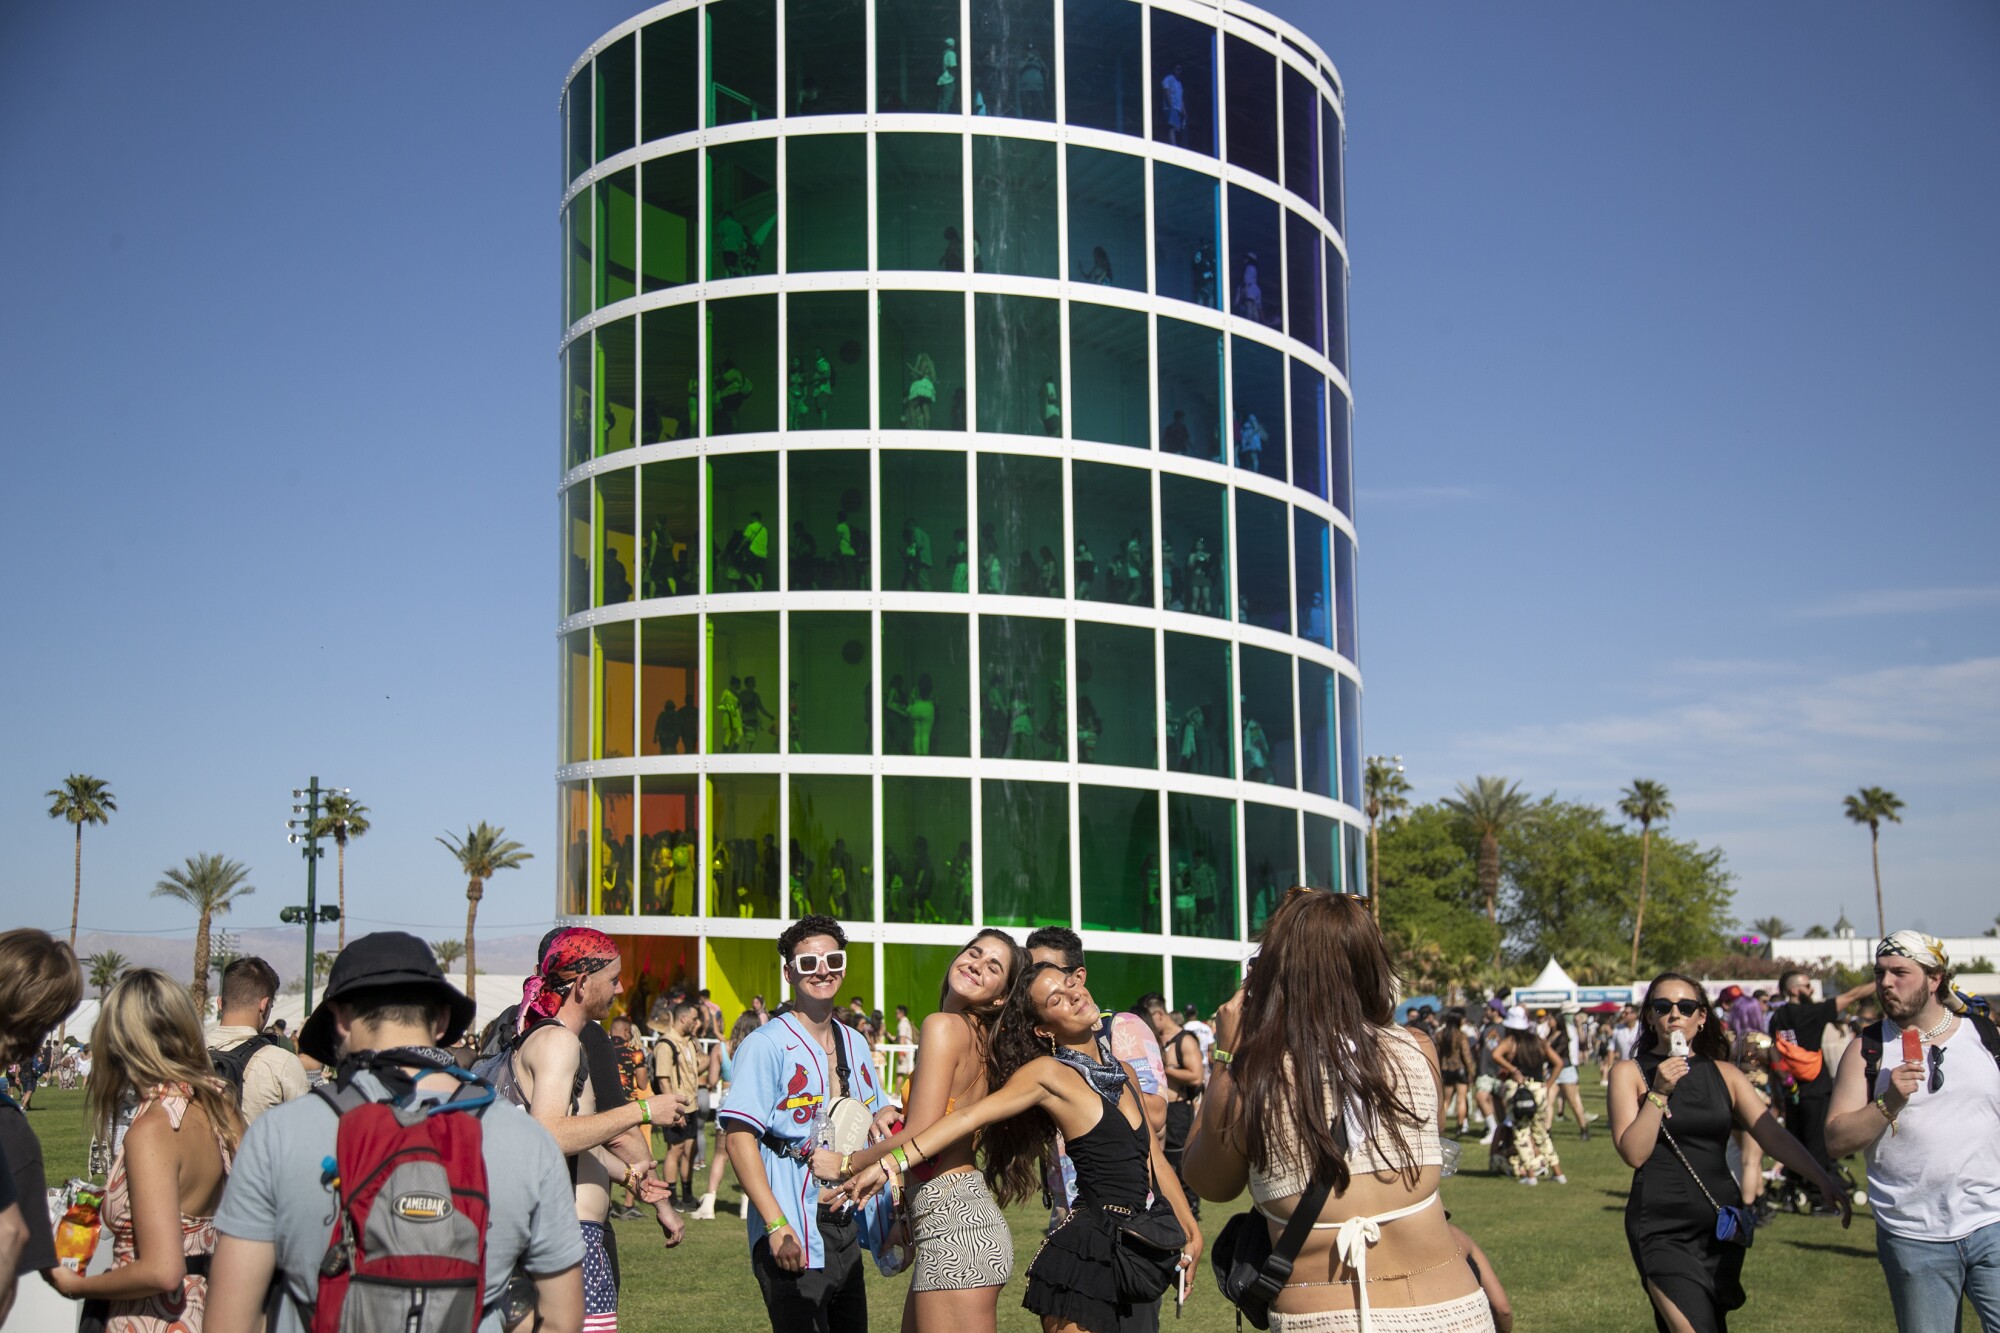 Festival goers pose for photos in front of a multilevel building in which people are walking.